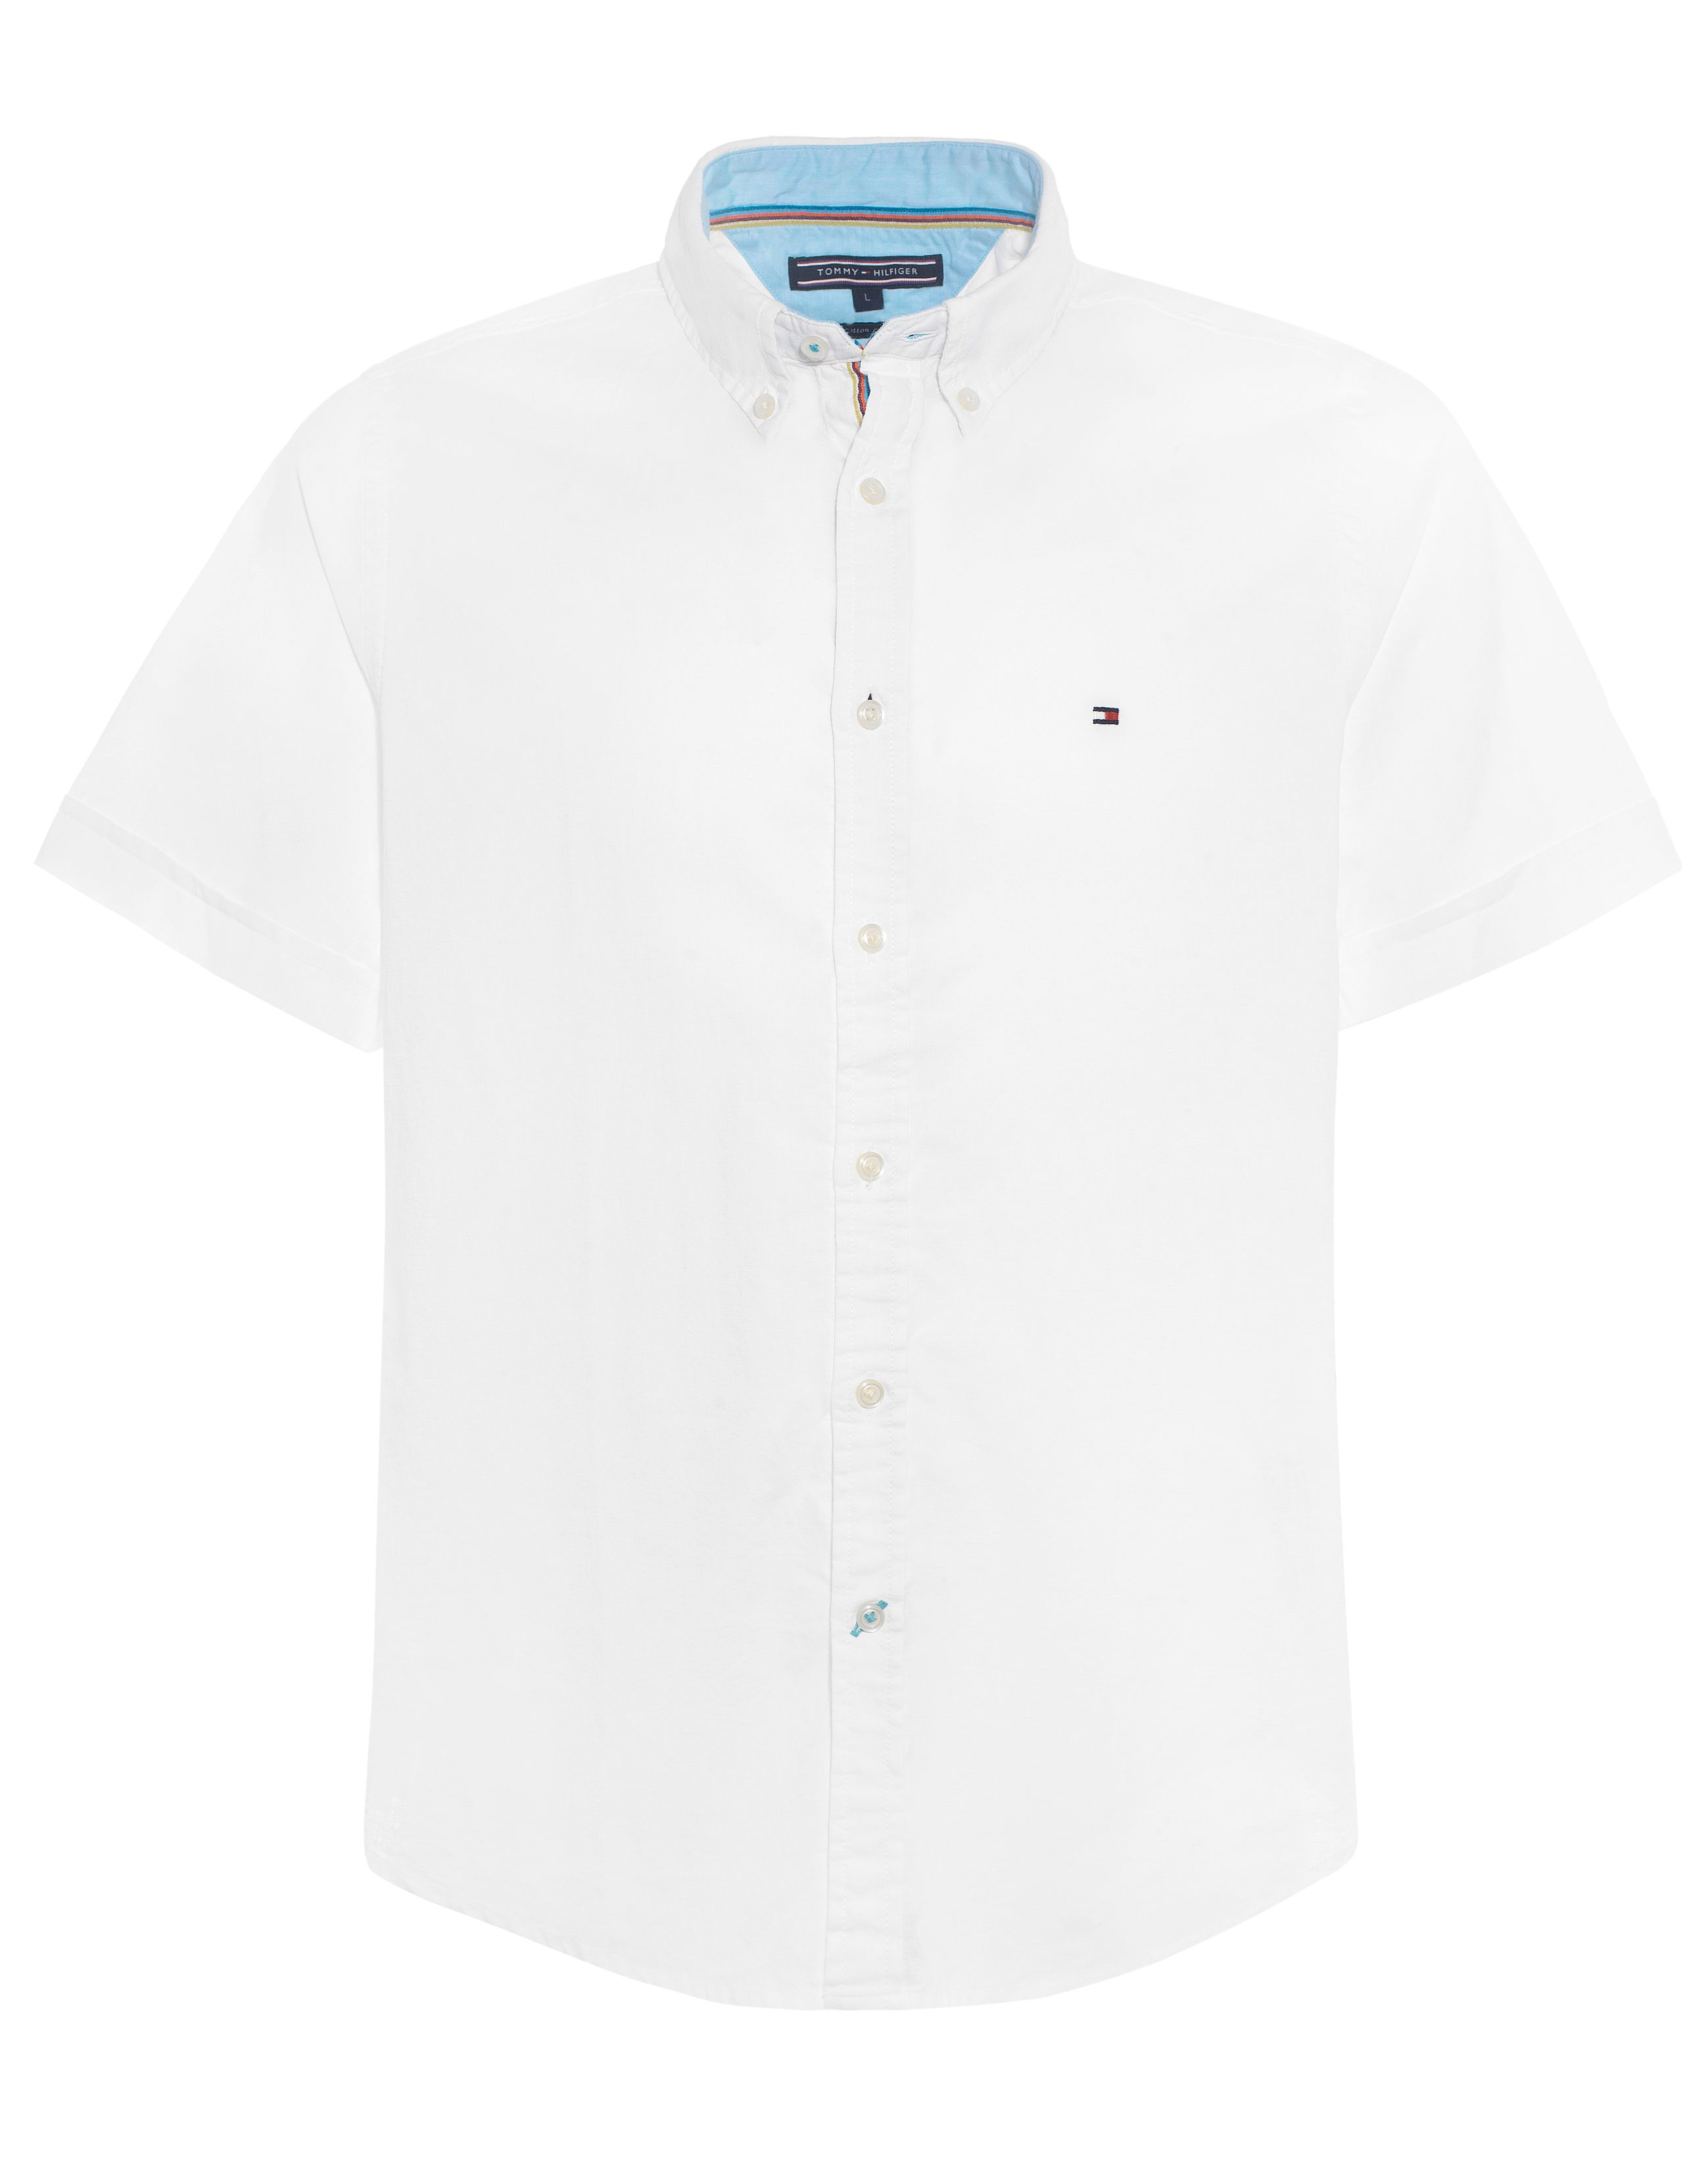 Tommy Hilfiger Plain Classic Fit Short Sleeve Button Down Shirt in ...